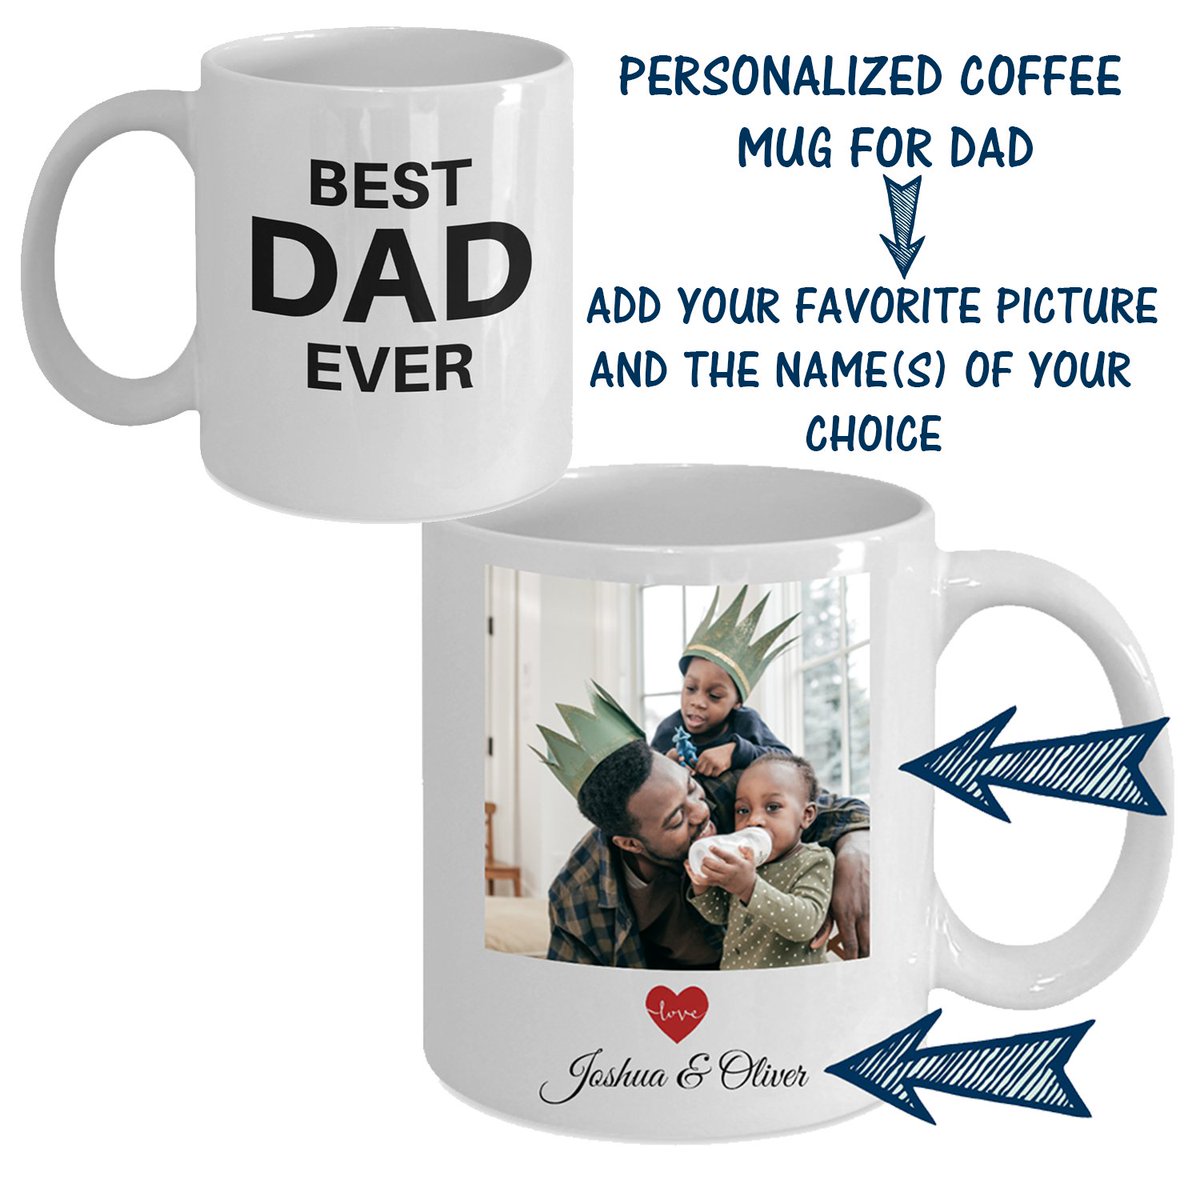 🔥 Gift For Dad, Personalized Mug: Best Dad Ever
Order here 👉 rosiesstore.net/products/gift-… #beautiful #bestdad #coffeemug #custom #fathersday #giftfordad #giftideas #happy #instagood #love #personalized #photogift